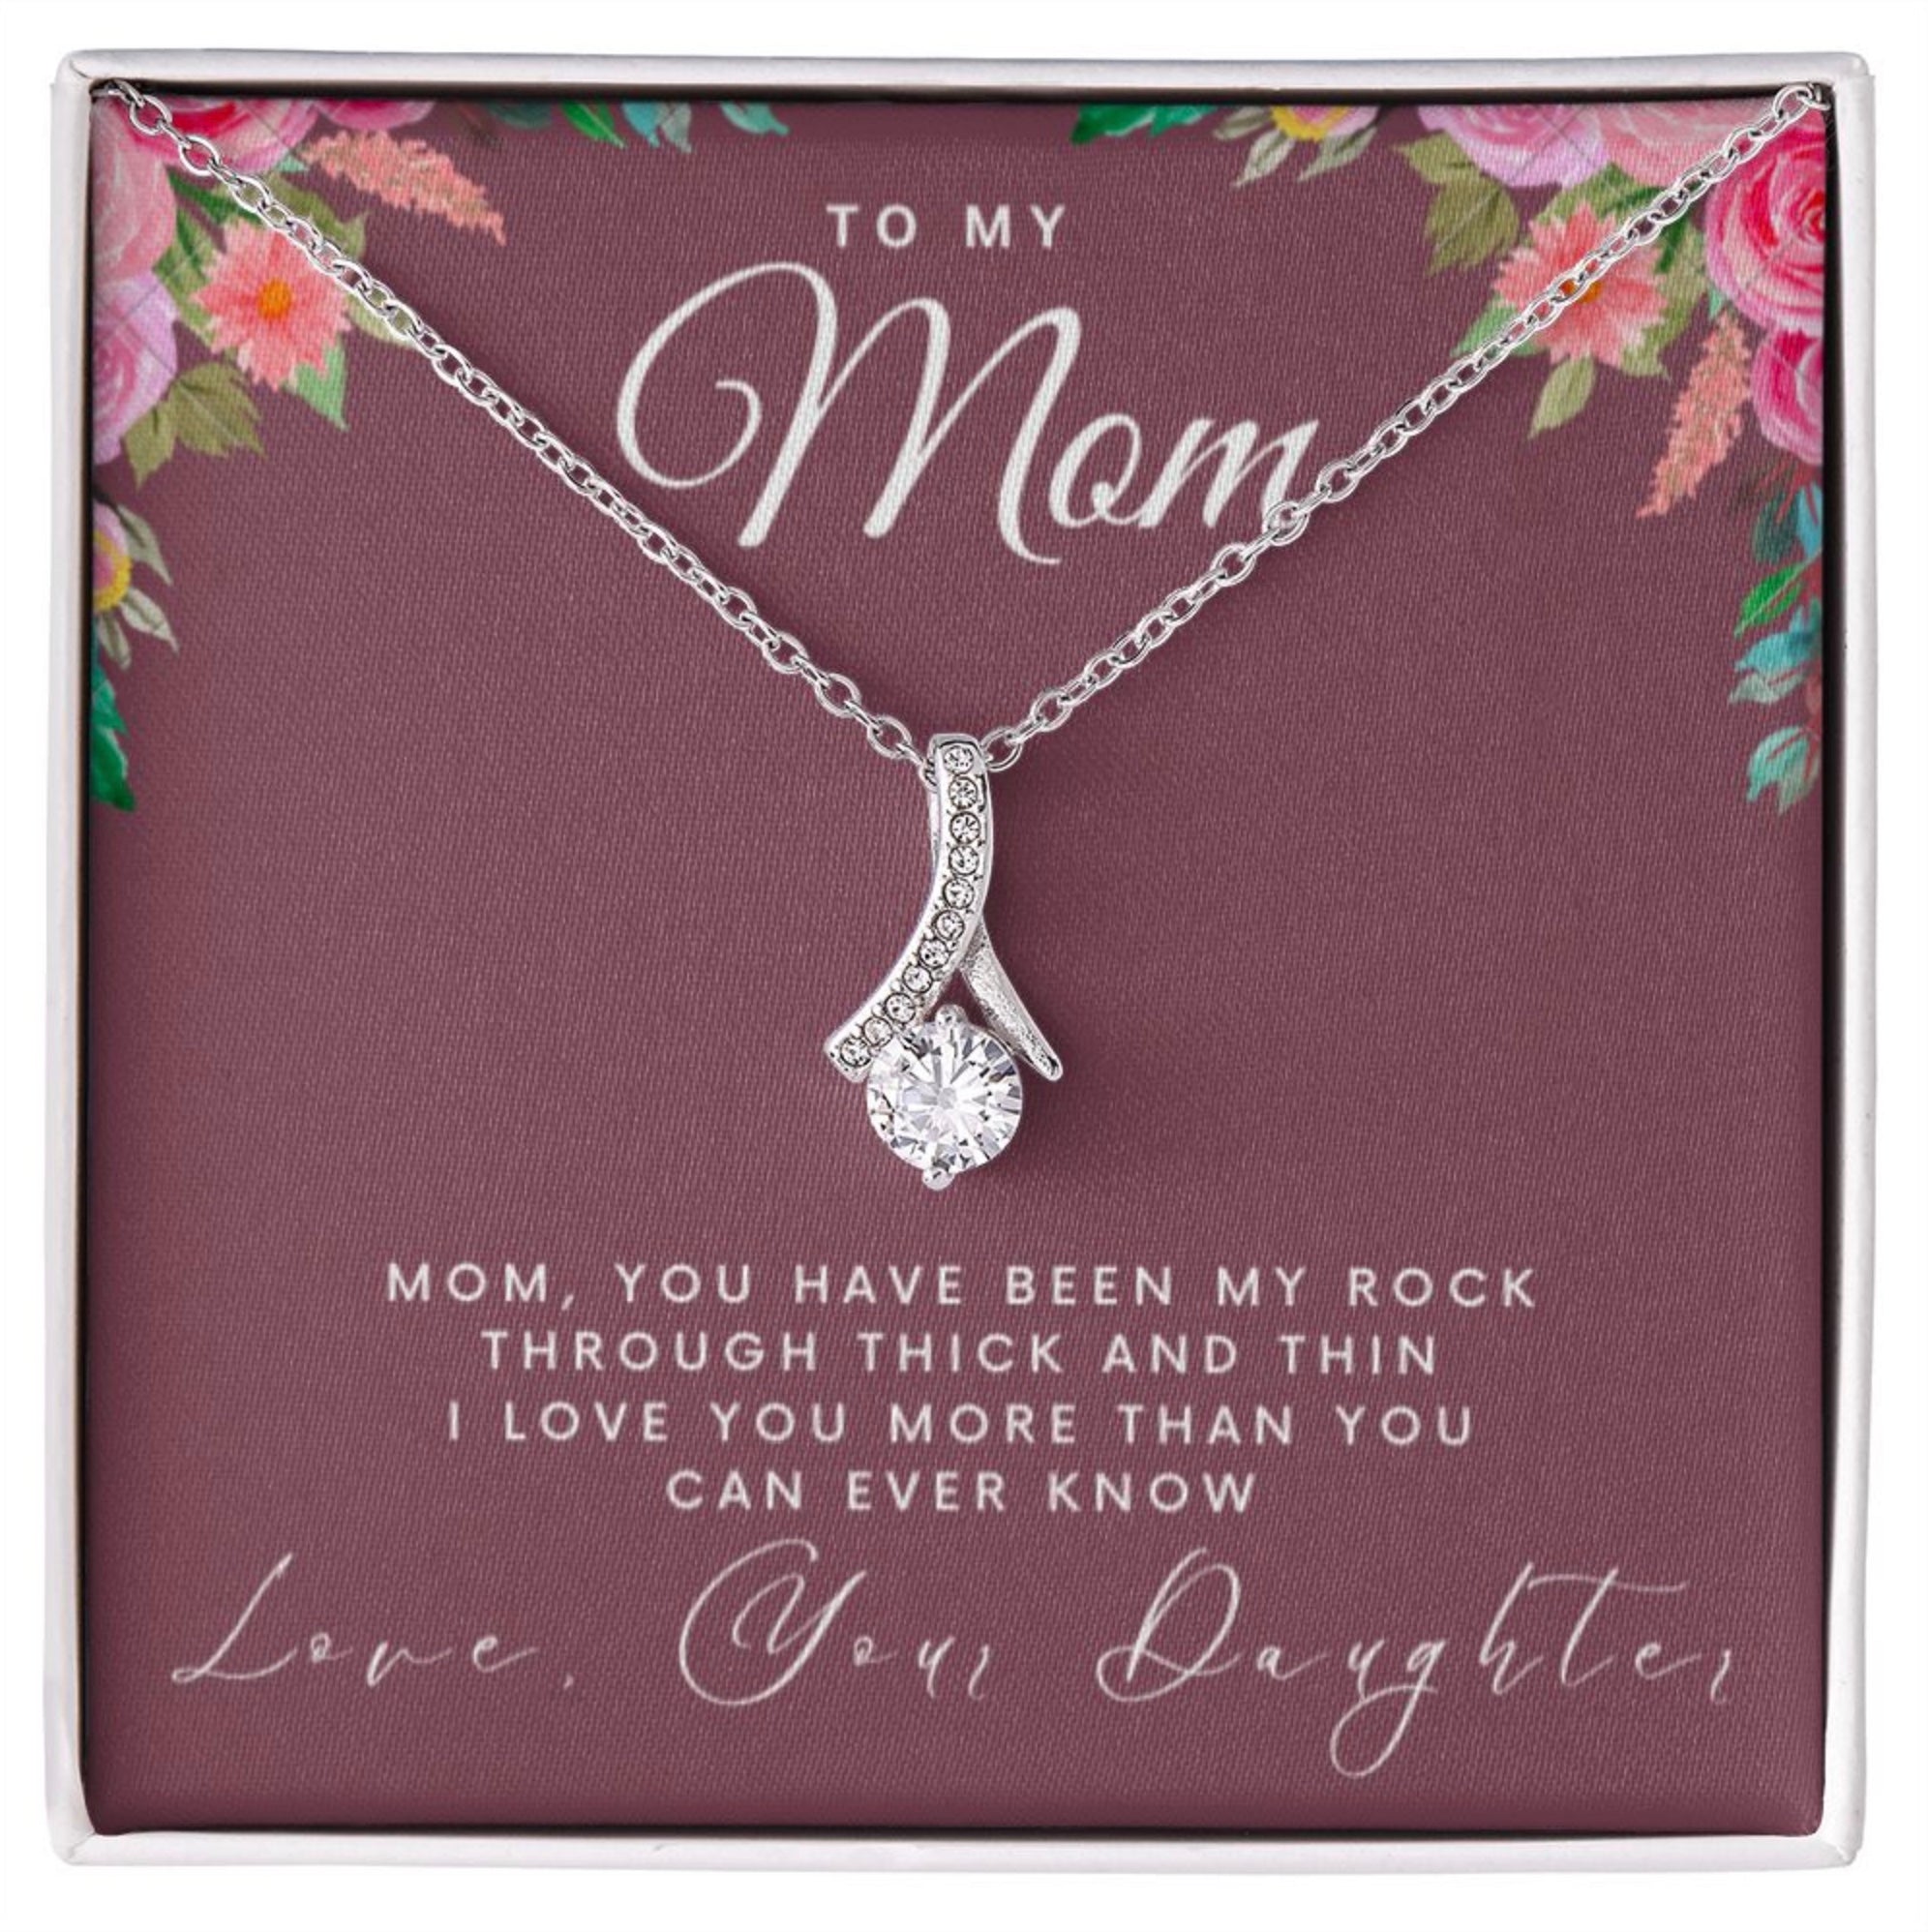 Mothers day gift message jewelry for mother, mom, mamma, mama, moms, mom, for the greatest and best mom in the world